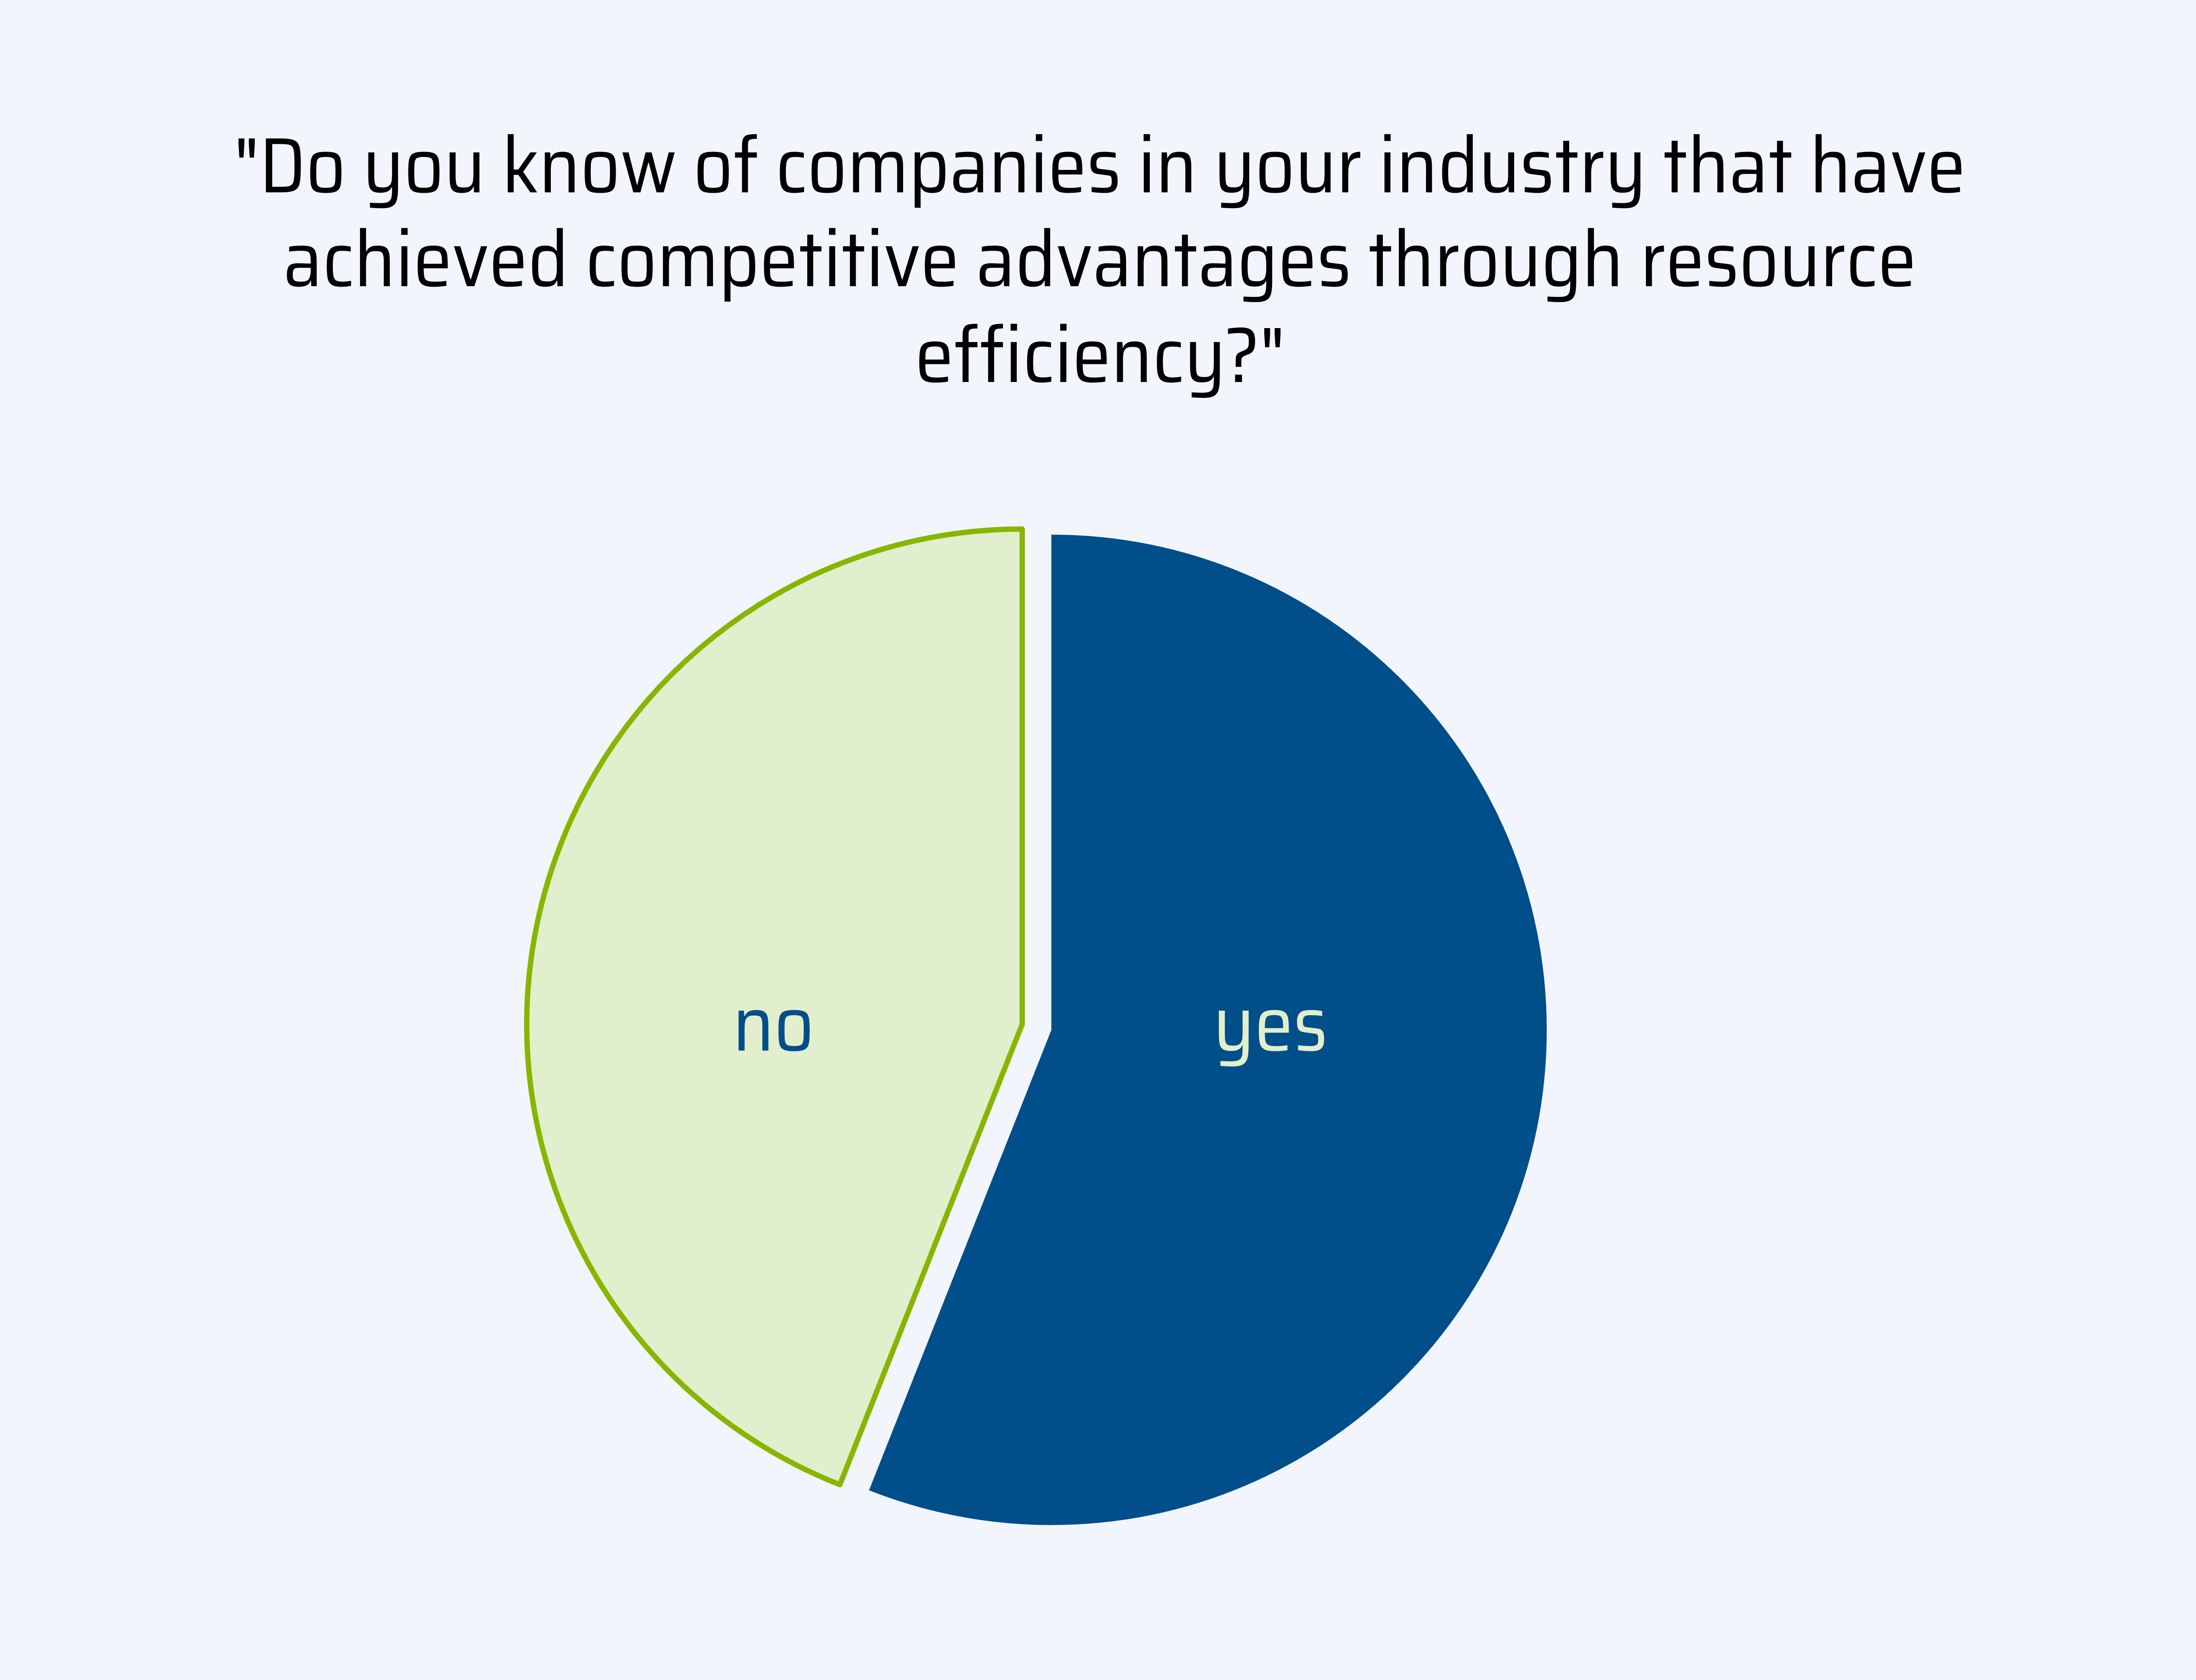 The pie chart visualizes the results of a survey commissioned by the VDI Center for Resource Efficiency to determine whether the 1,000 respondents know of companies in their industry that have achieved competitive advantages through resource efficiency. 55 % of the respondents answered "yes" to this question.